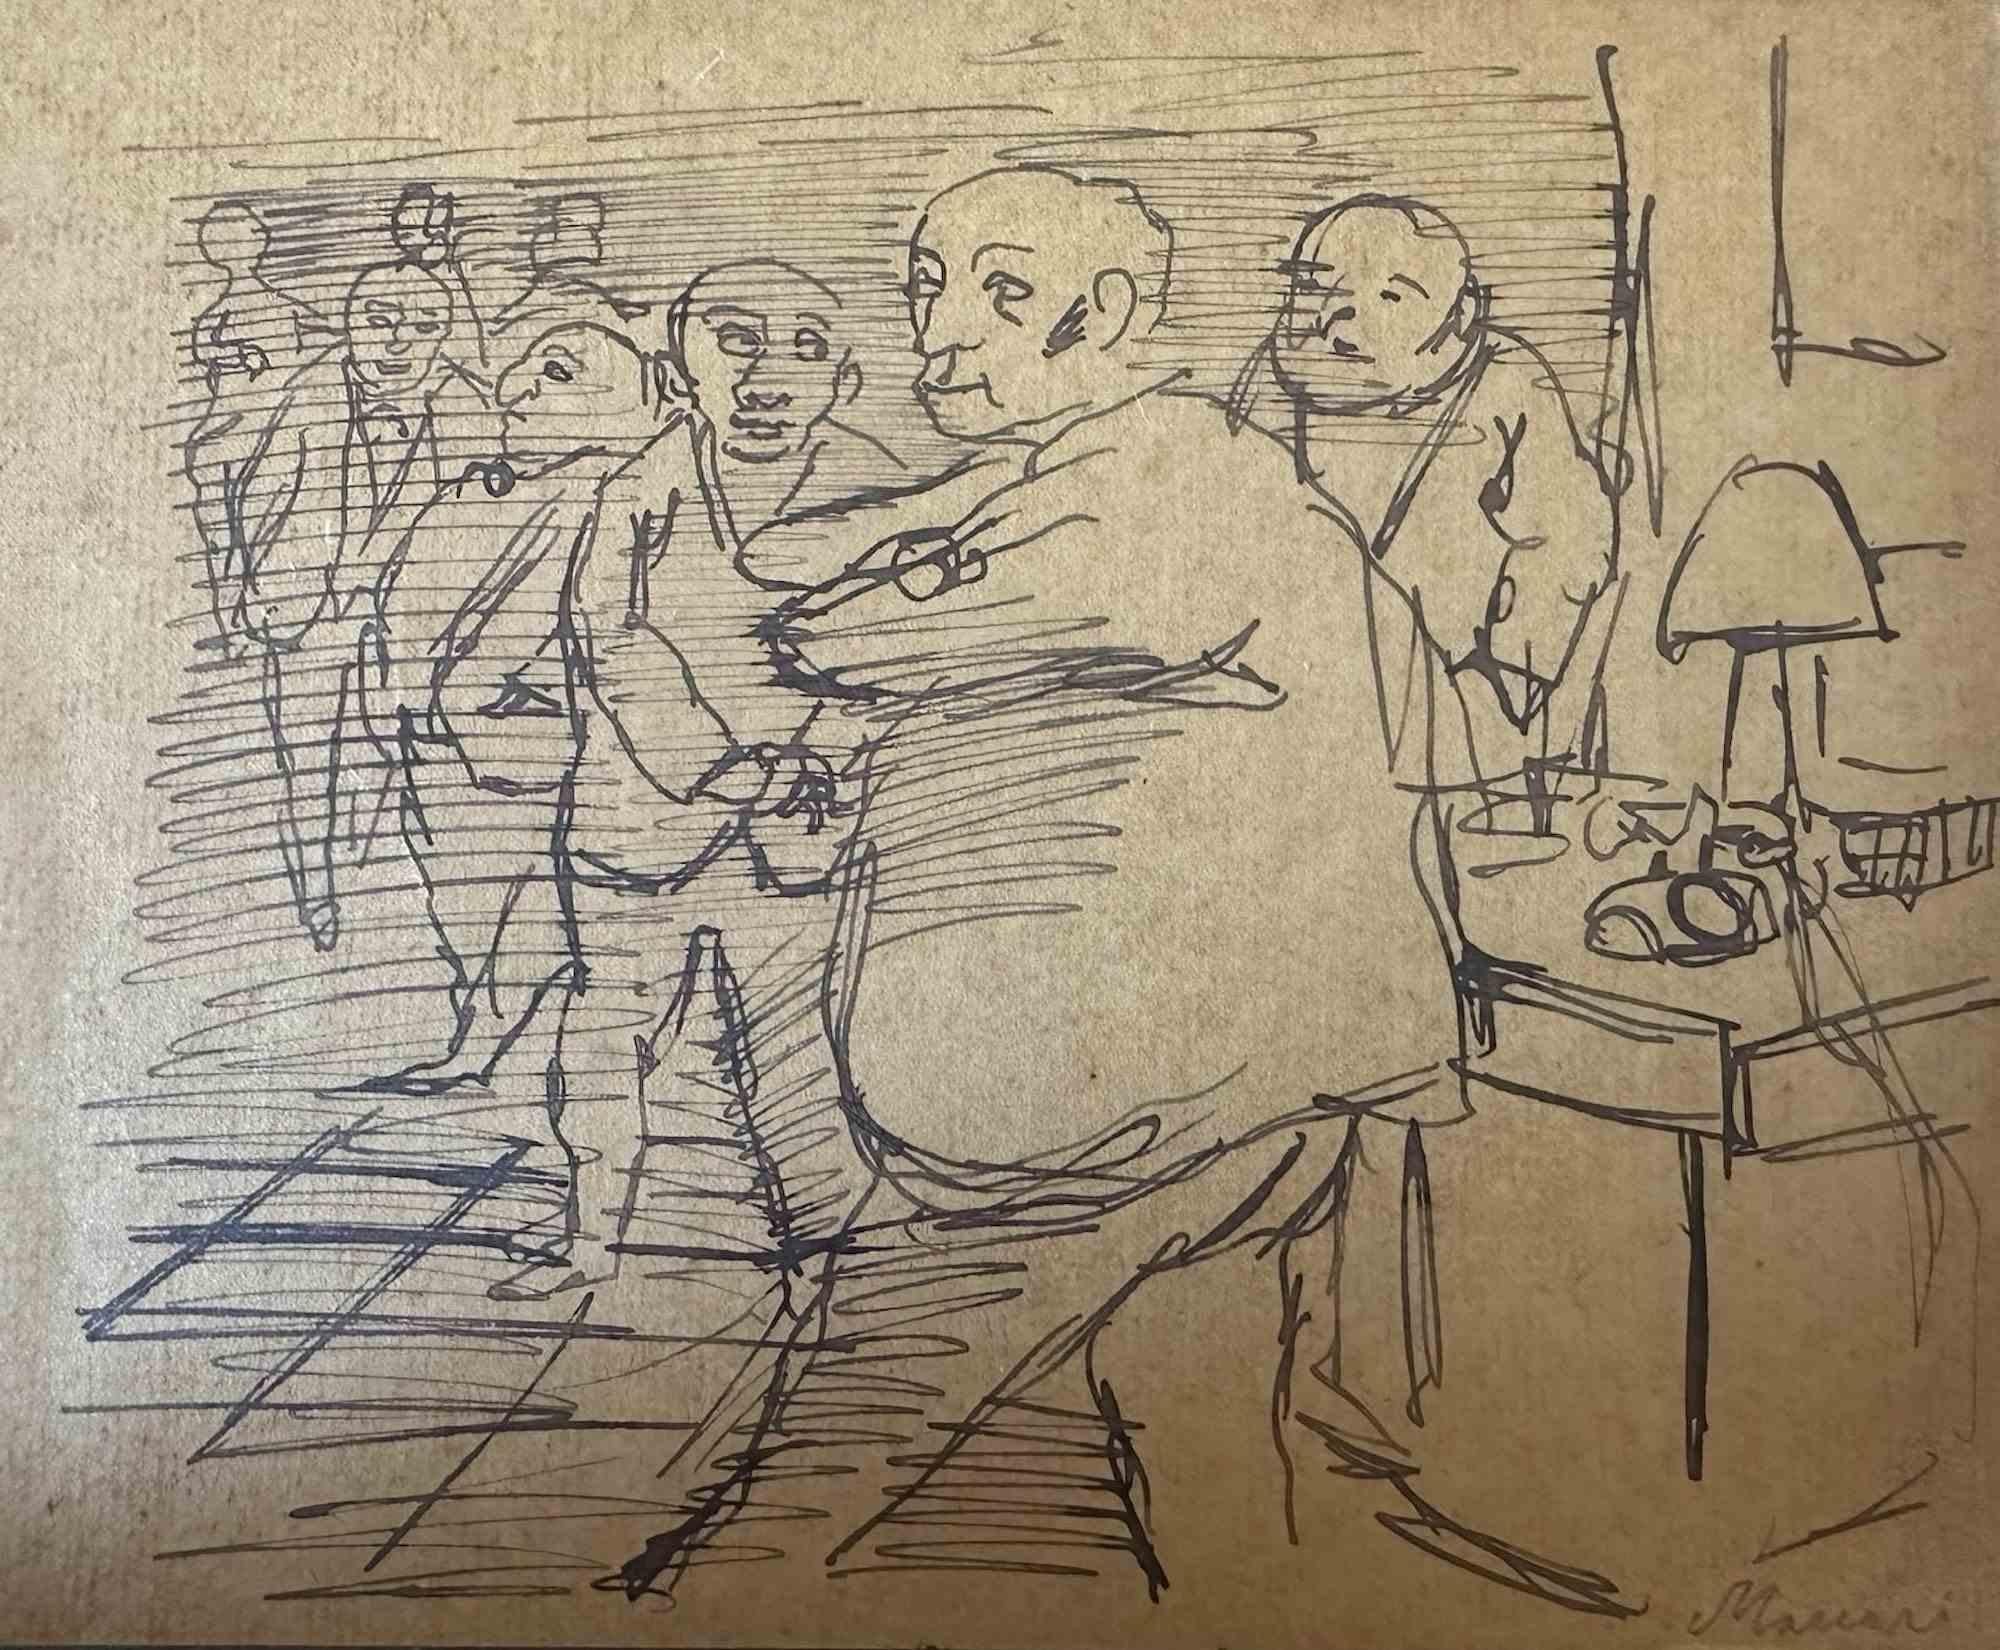 The Crowd - Drawing by Mino Maccari - 1960s